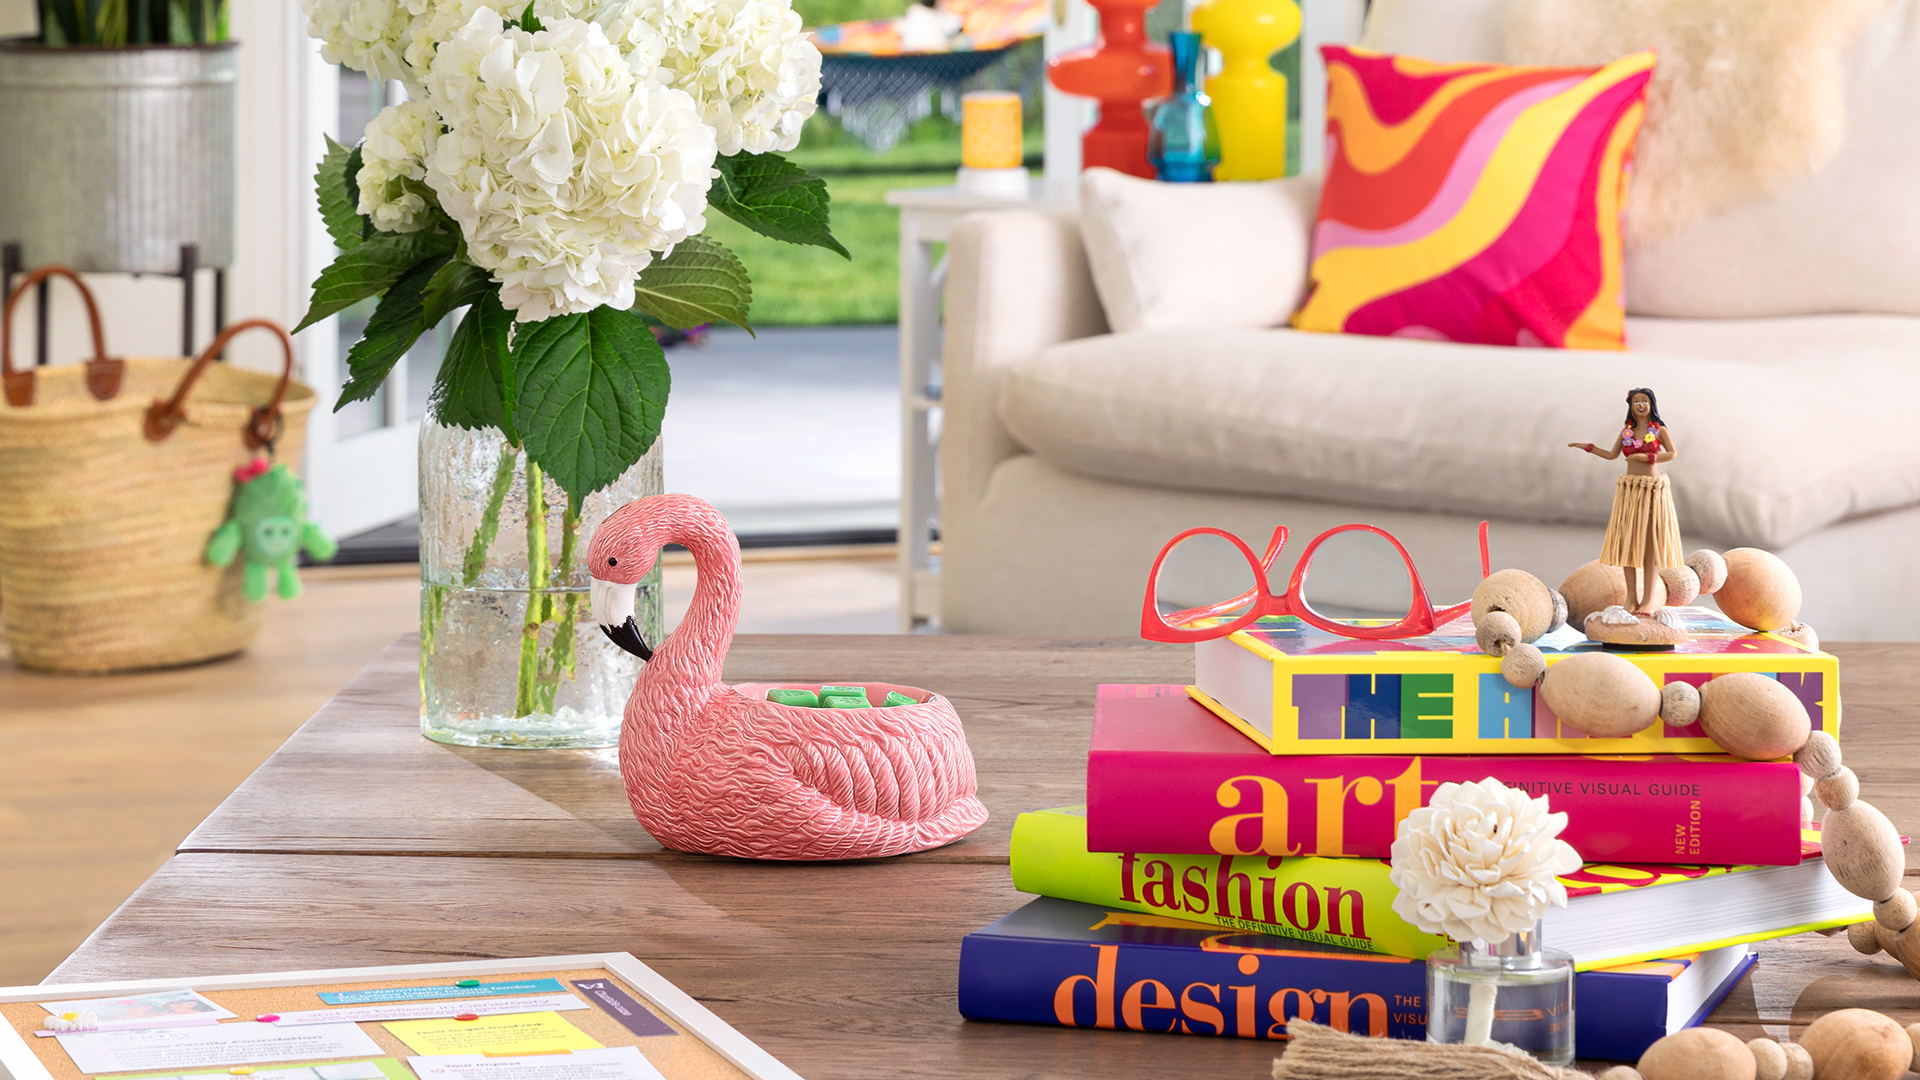 Living room full of vibrant summer colors and on coffee table sits a pink flamingo wax warmer, fragrance flower, stack of books, reading glasses, a hula girl and vase with white flowers in it.